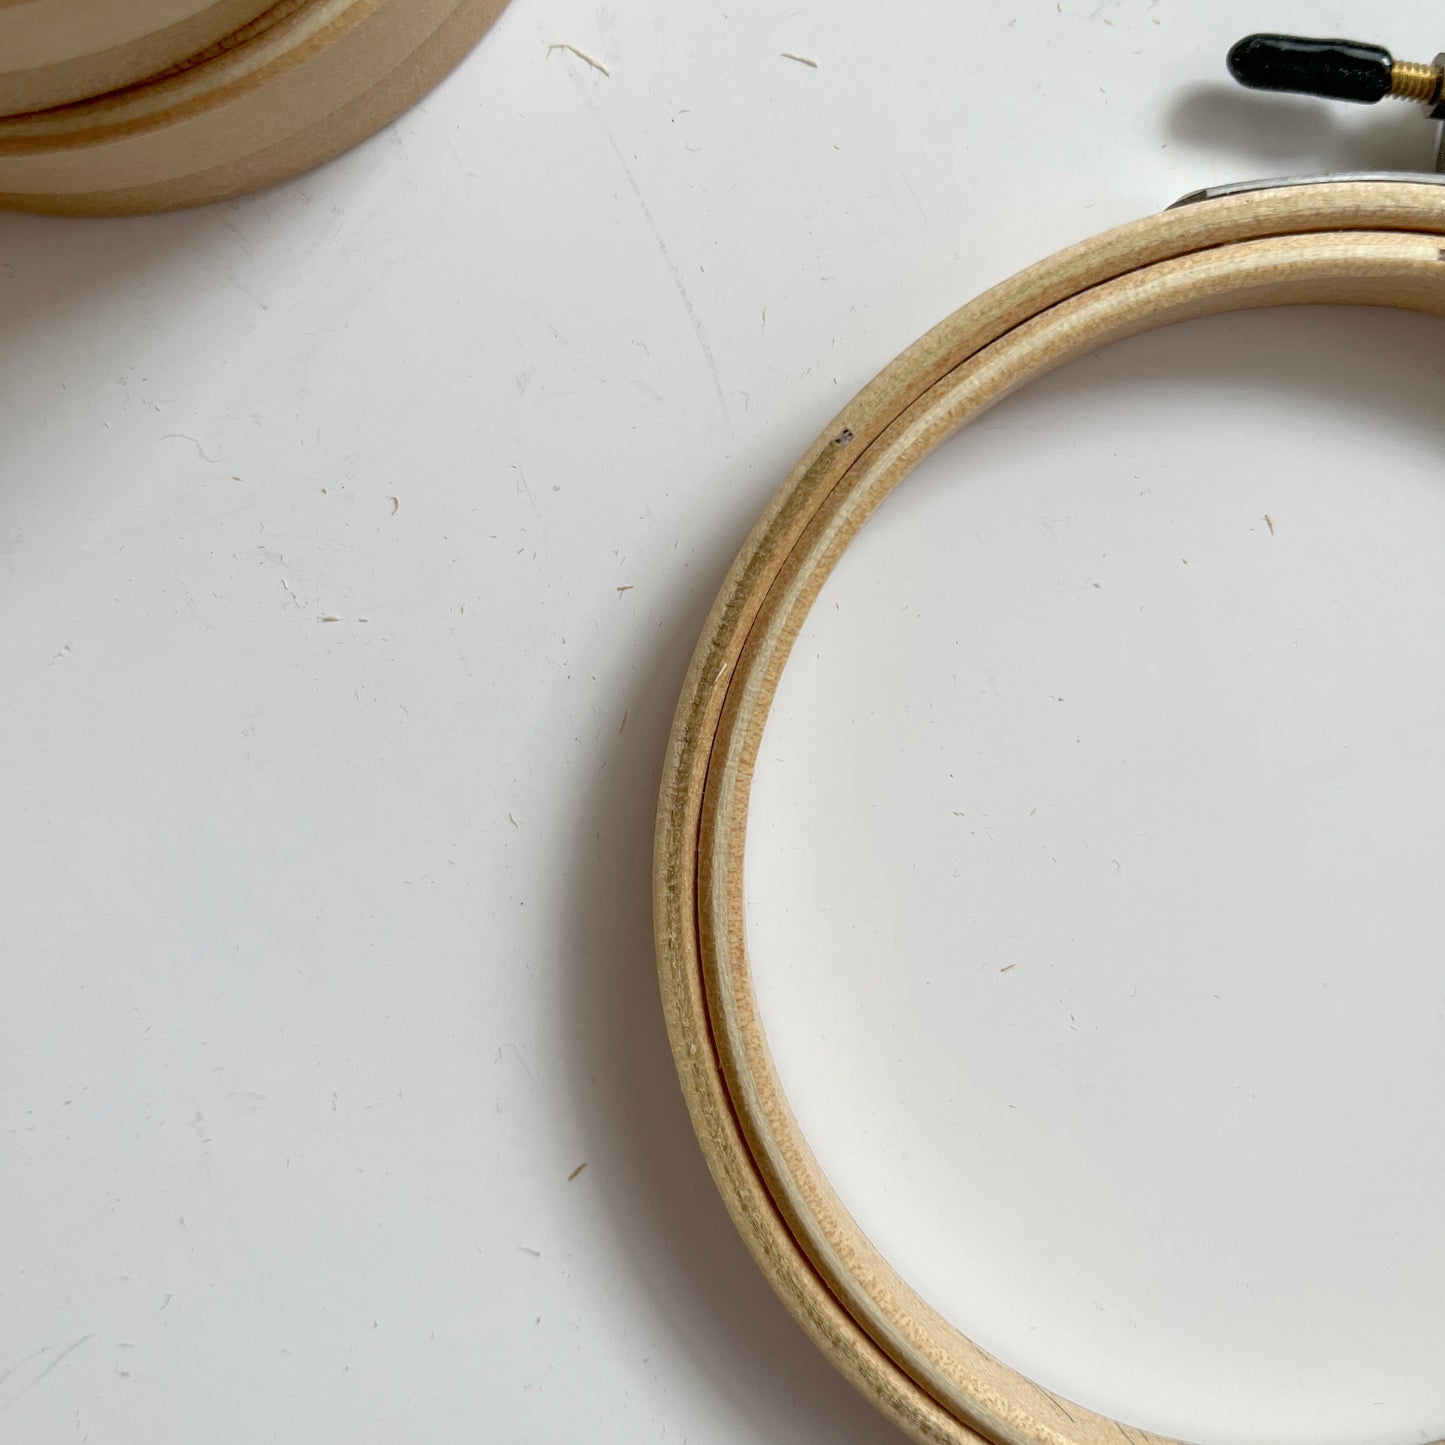 "Seconds quality" wooden Embroidery Hoops